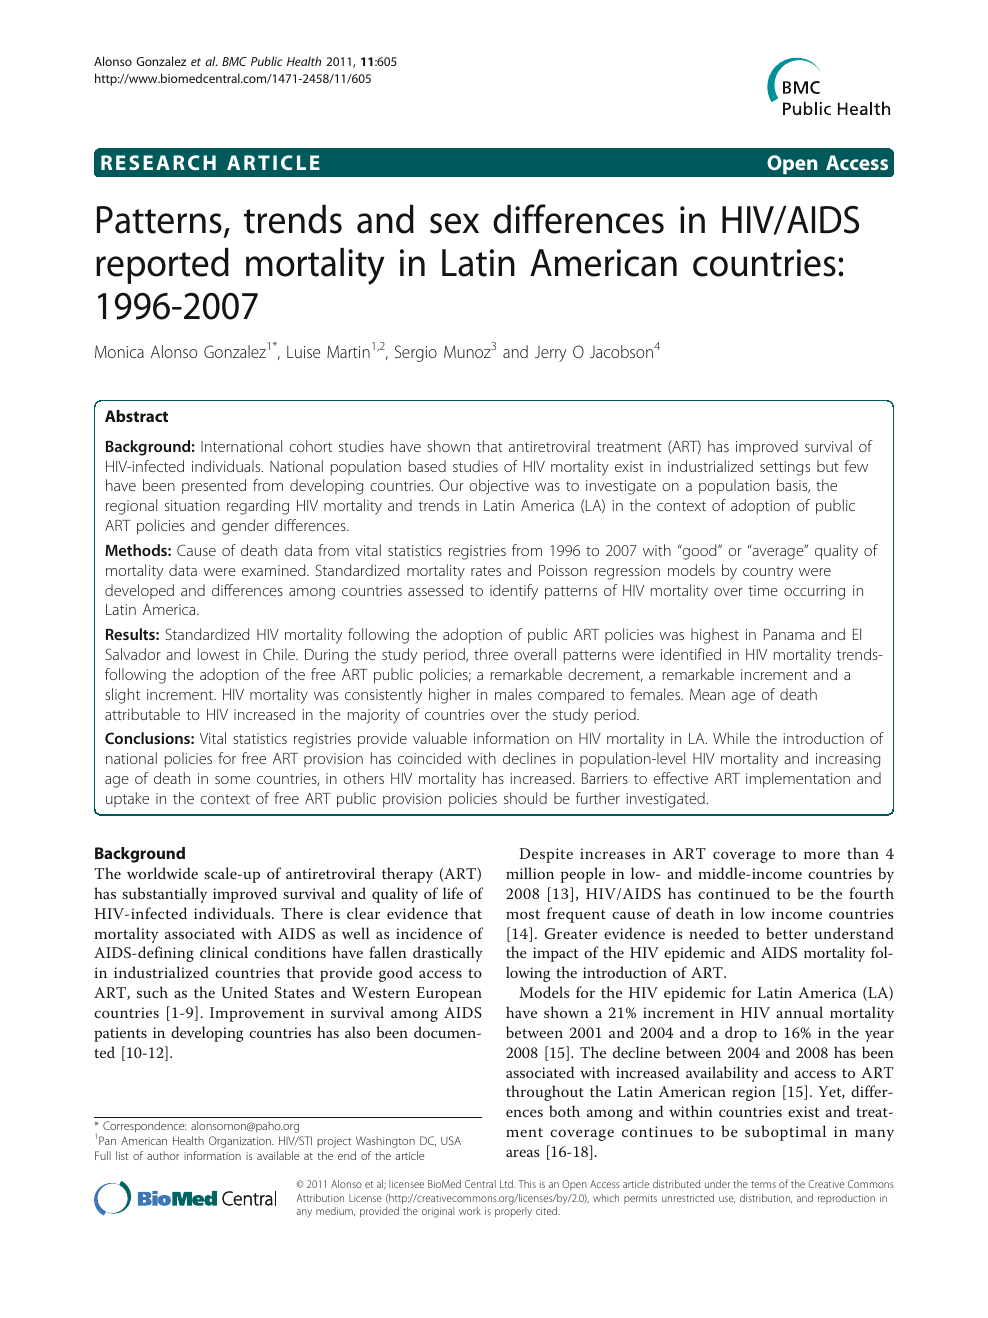 Patterns Trends And Sex Differences In Hiv Aids Reported Mortality In Latin American Countries 1996 07 Topic Of Research Paper In Health Sciences Download Scholarly Article Pdf And Read For Free On Cyberleninka